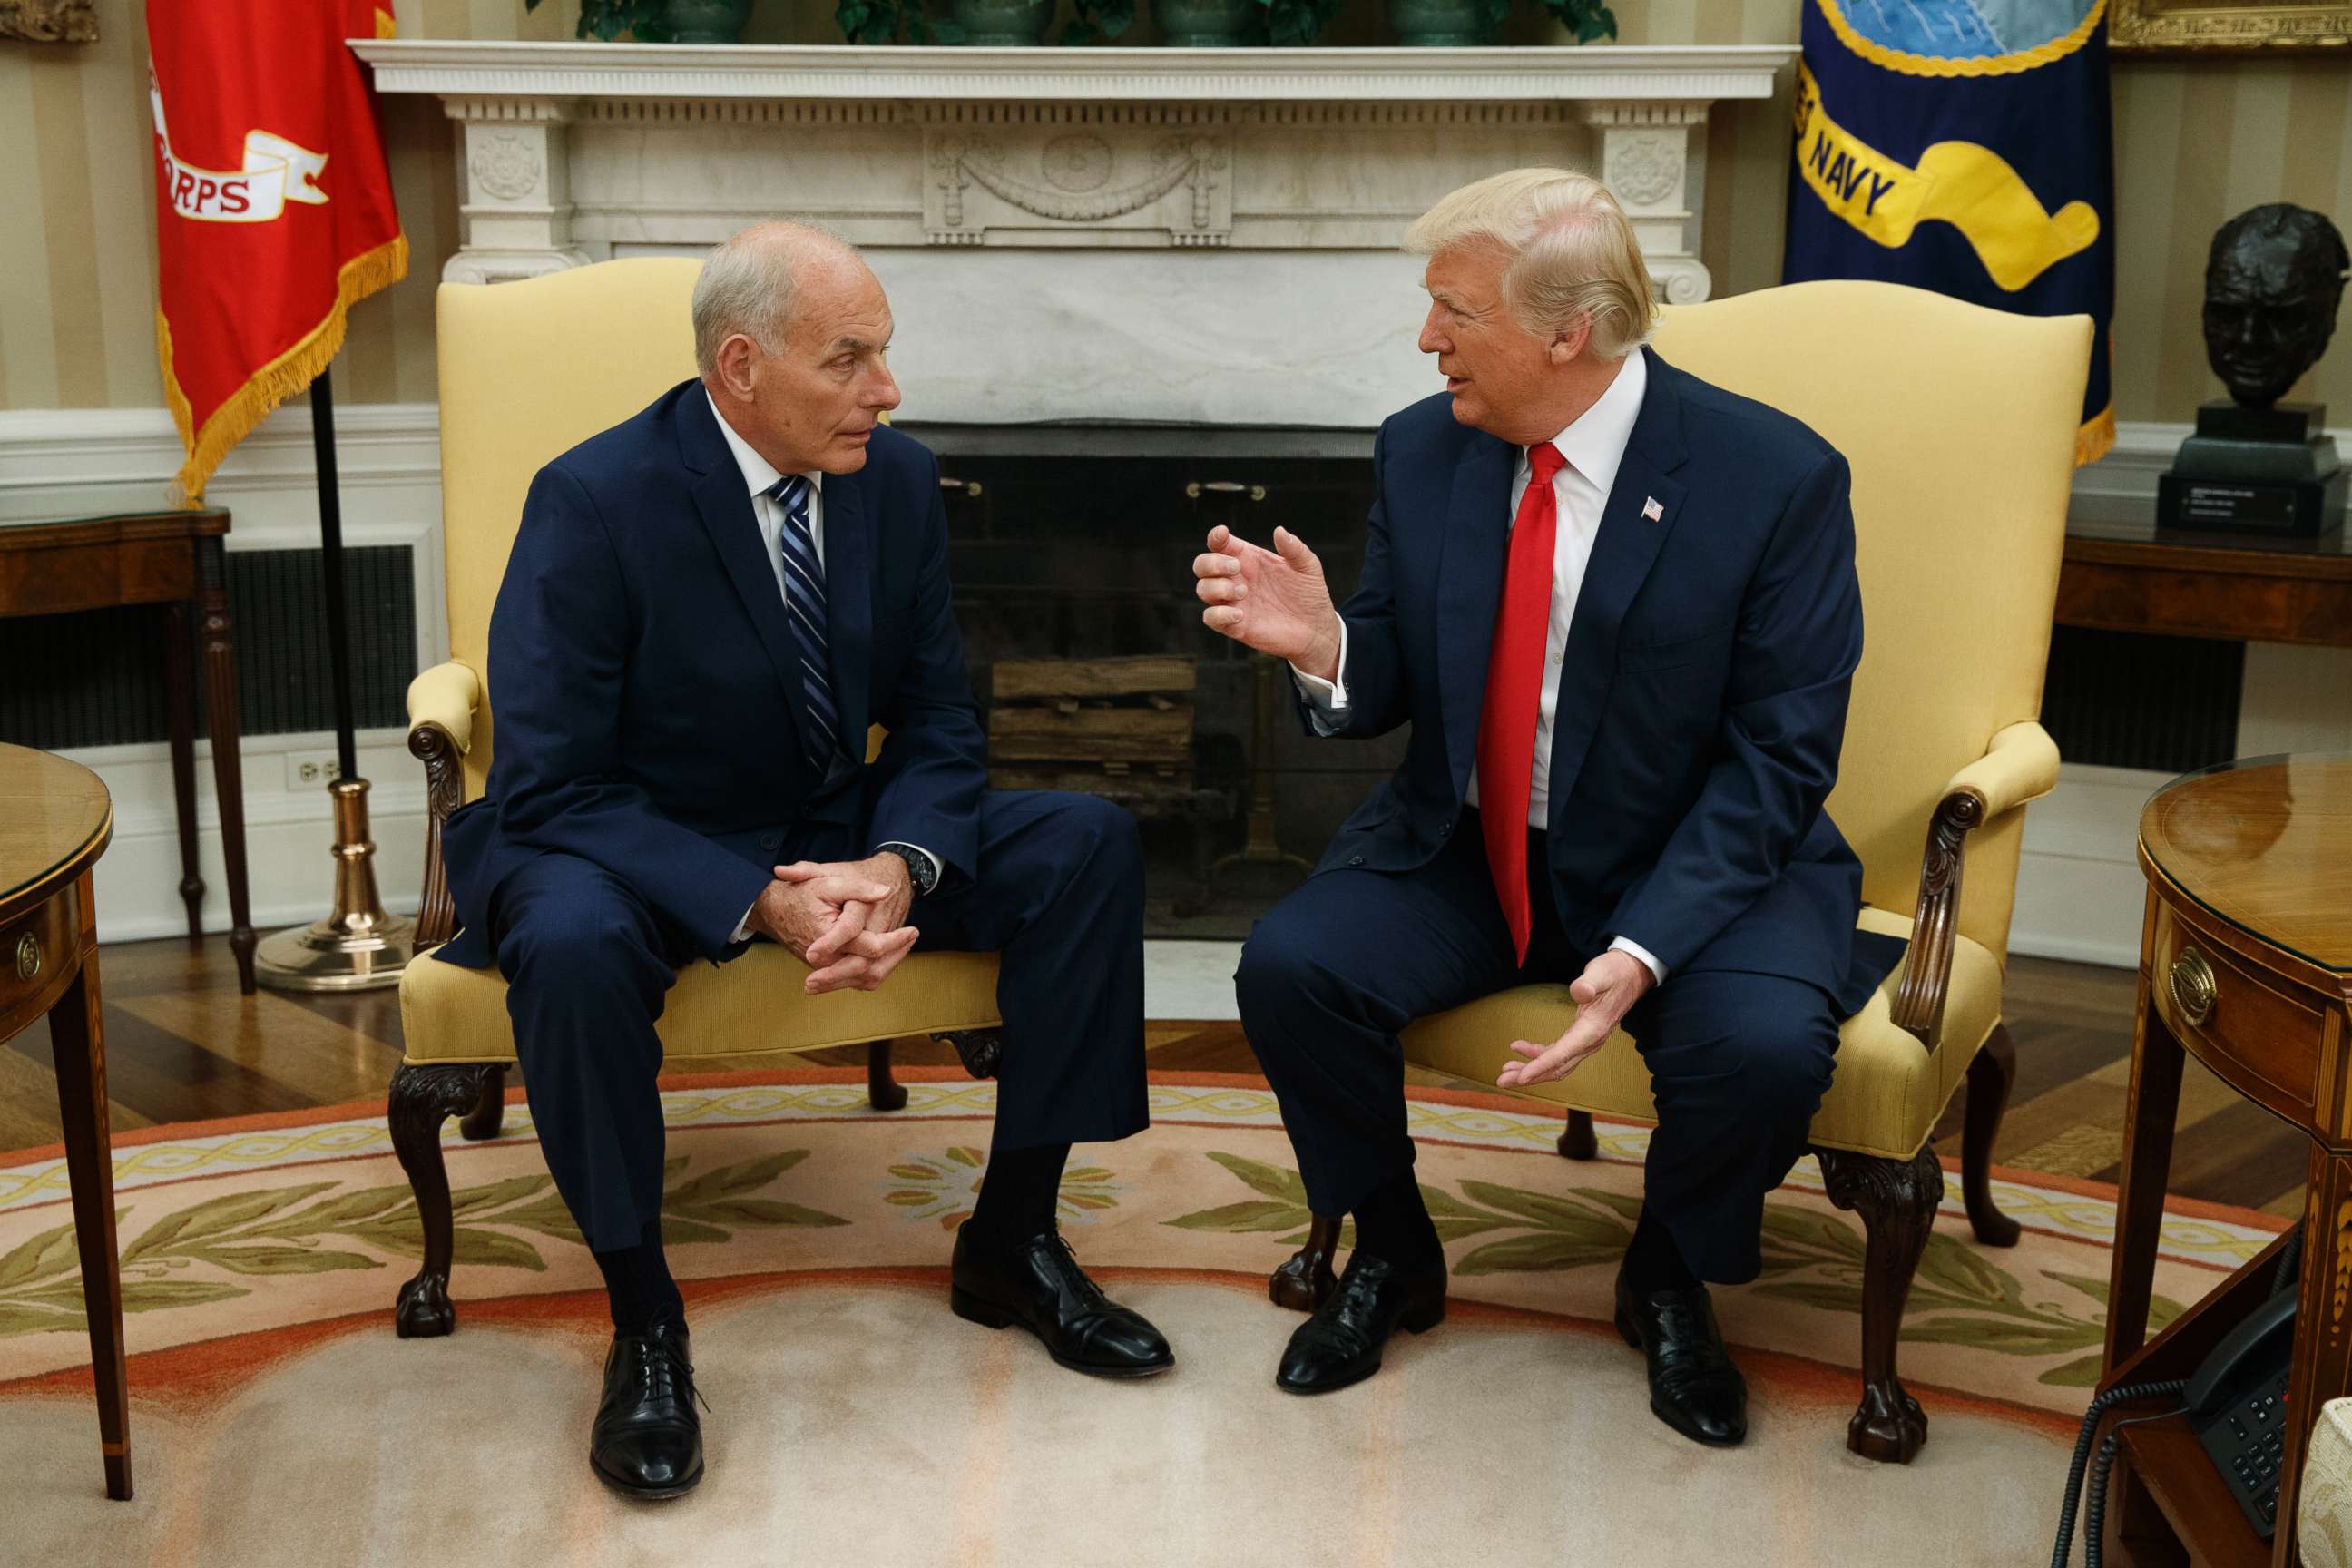 PHOTO: President Donald Trump talks with new White House Chief of Staff John Kelly after he was privately sworn in during a ceremony in the Oval Office with President Donald Trump, July 31, 2017, in Washington, D.C.